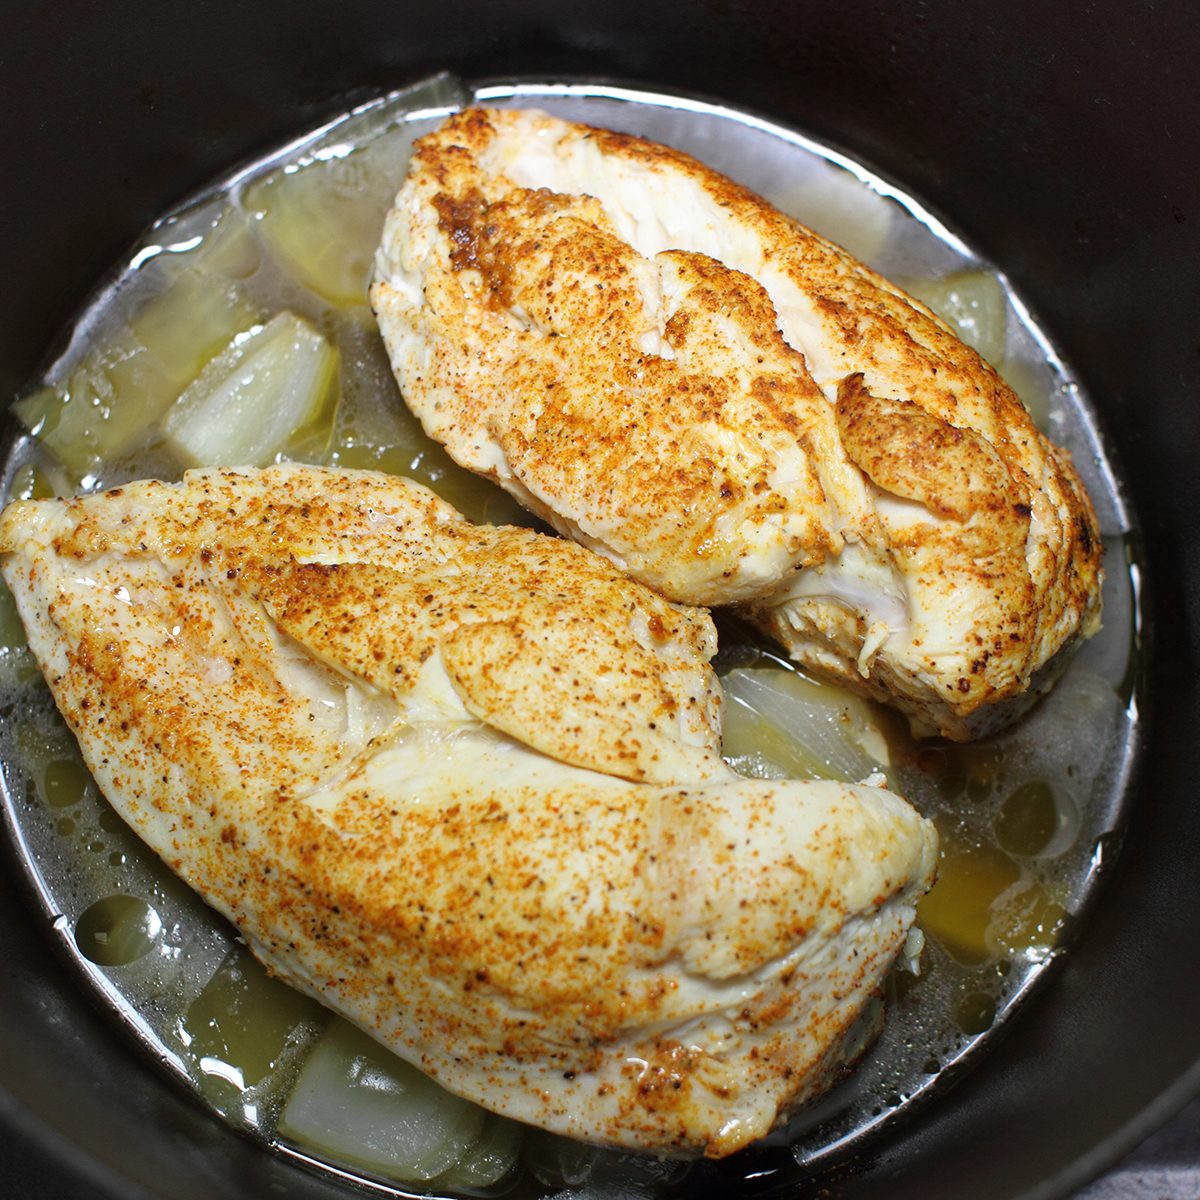 https://www.tasteofhome.com/wp-content/uploads/2020/01/delicious-braised-chicken-breast-cooked-dutch-shutterstock_1523686109.jpg?fit=700%2C700